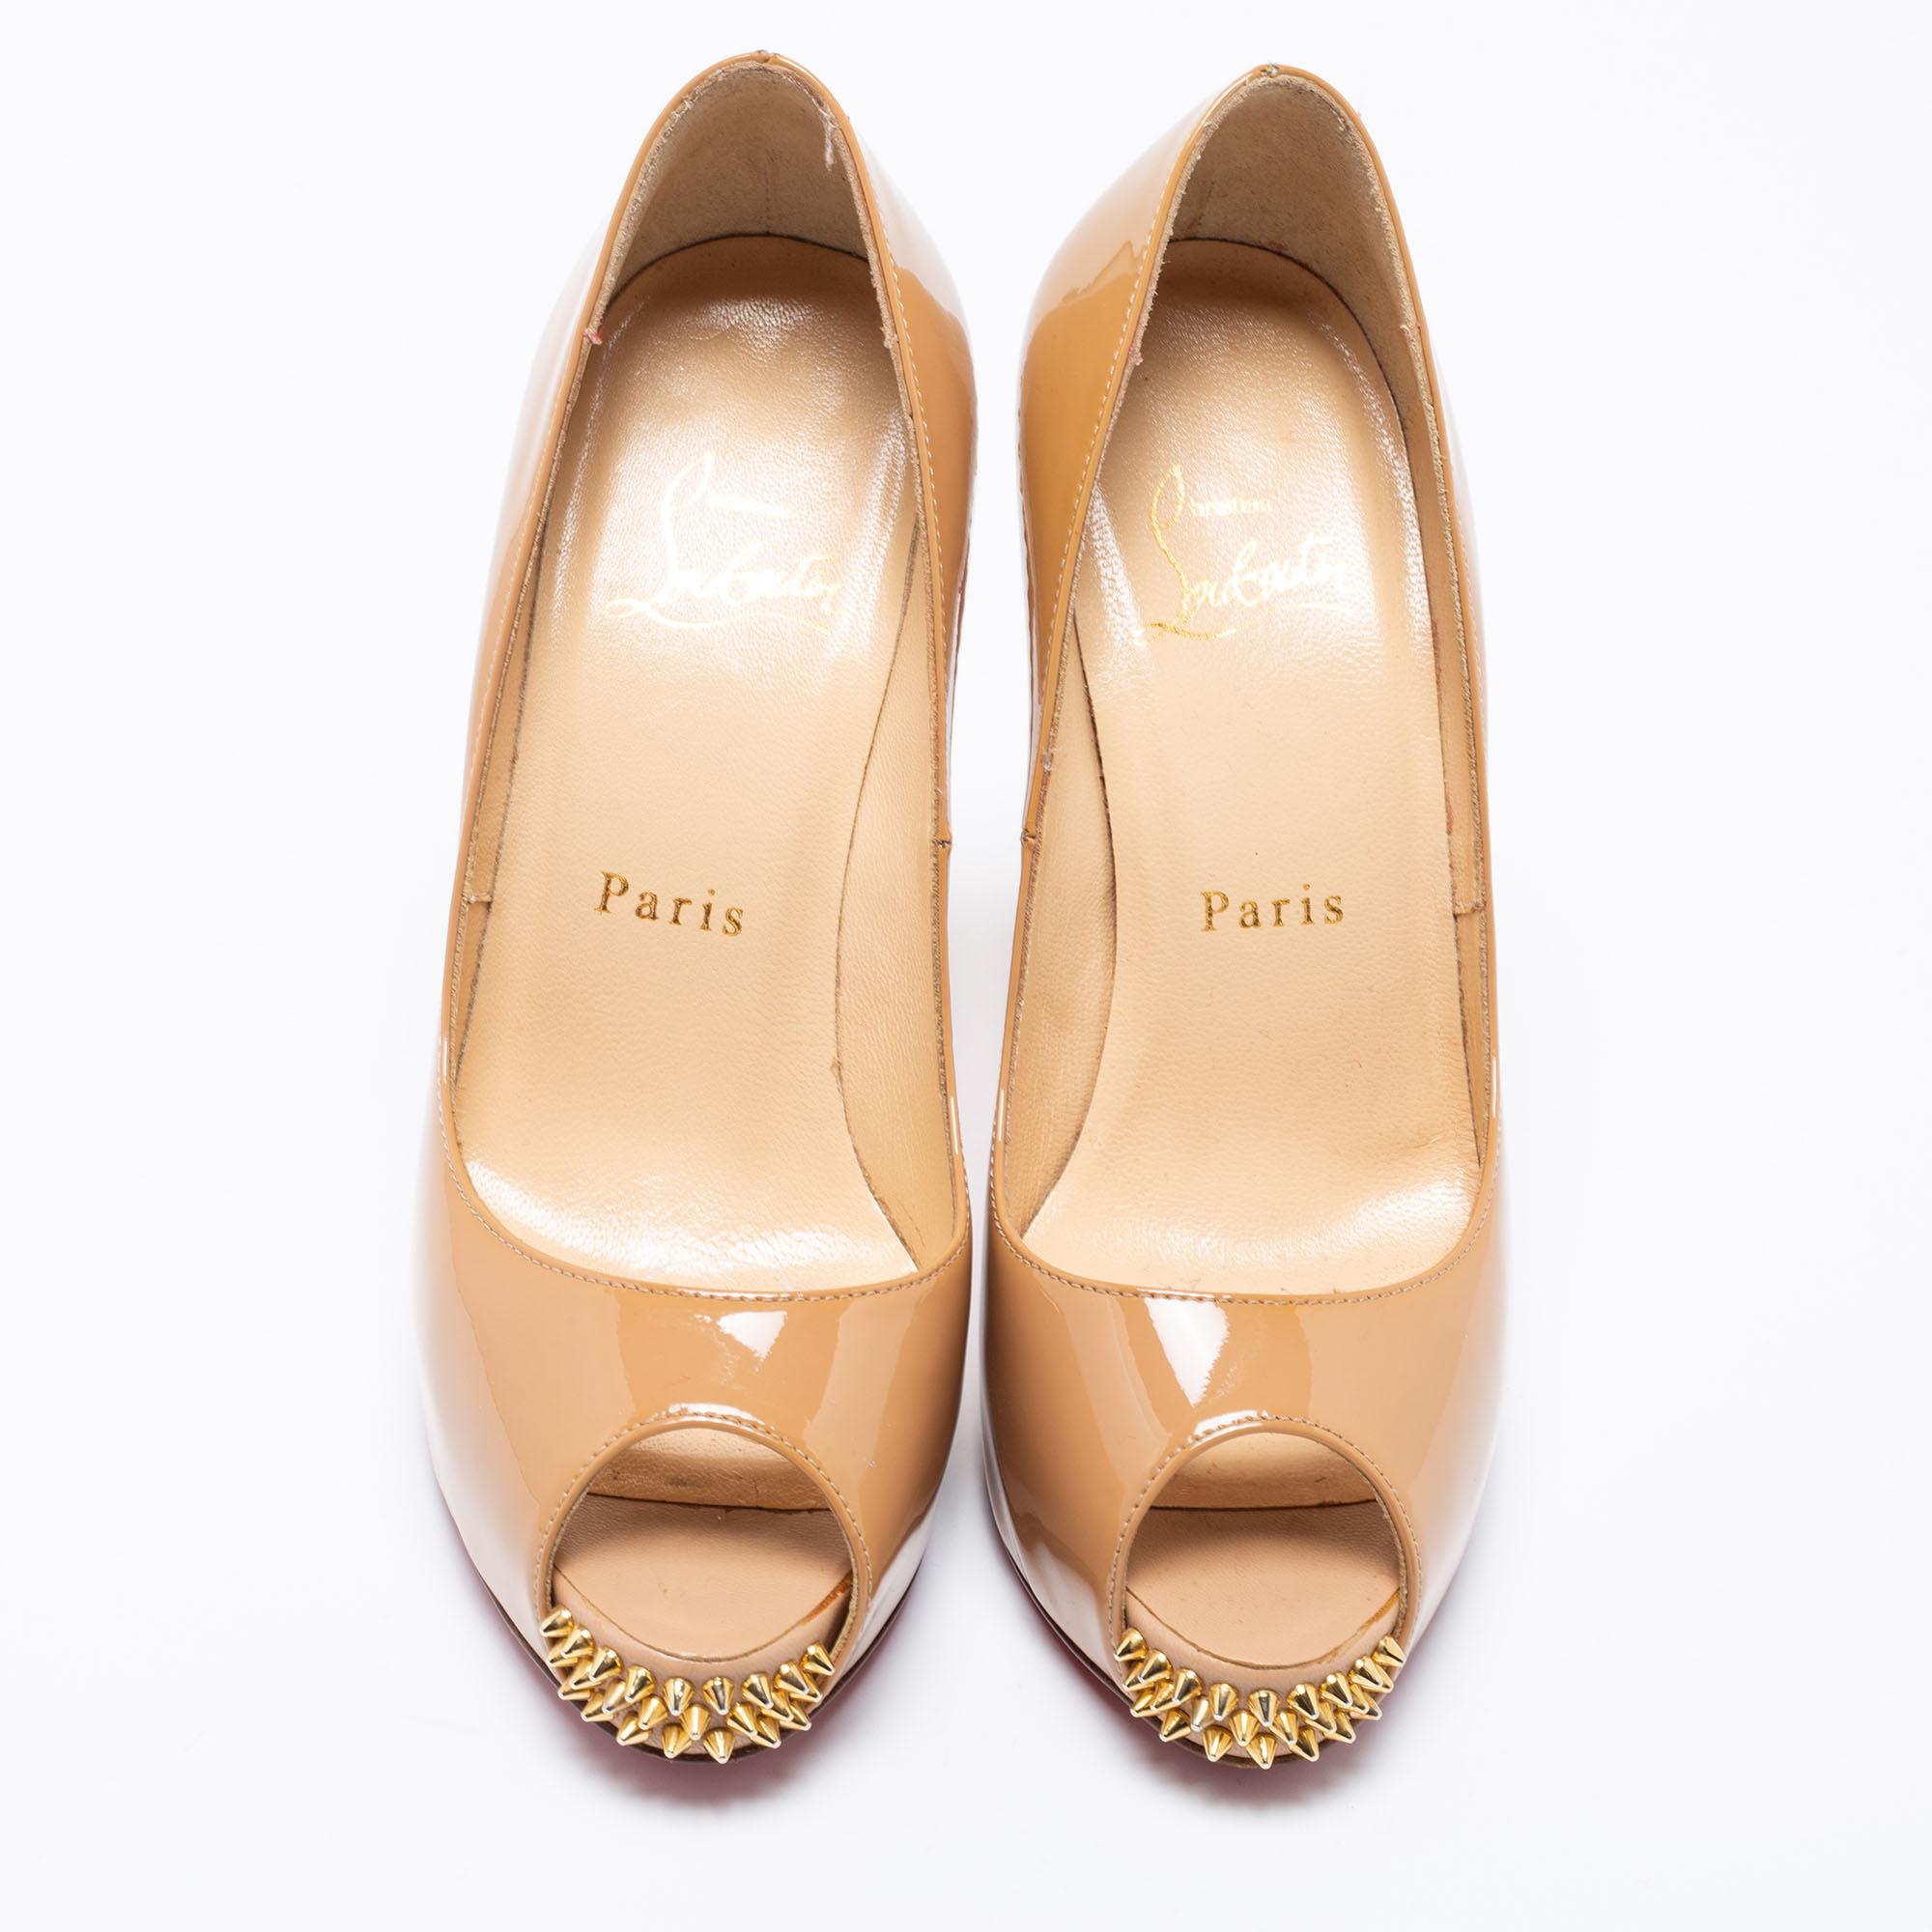 The architectural silhouette and precise cuts of this pair of pumps from Christian Louboutin exemplify the brand's mastery in the art of stiletto making. Finely created from patent leather, the gold-tone studs enhance its chicness and it is lifted